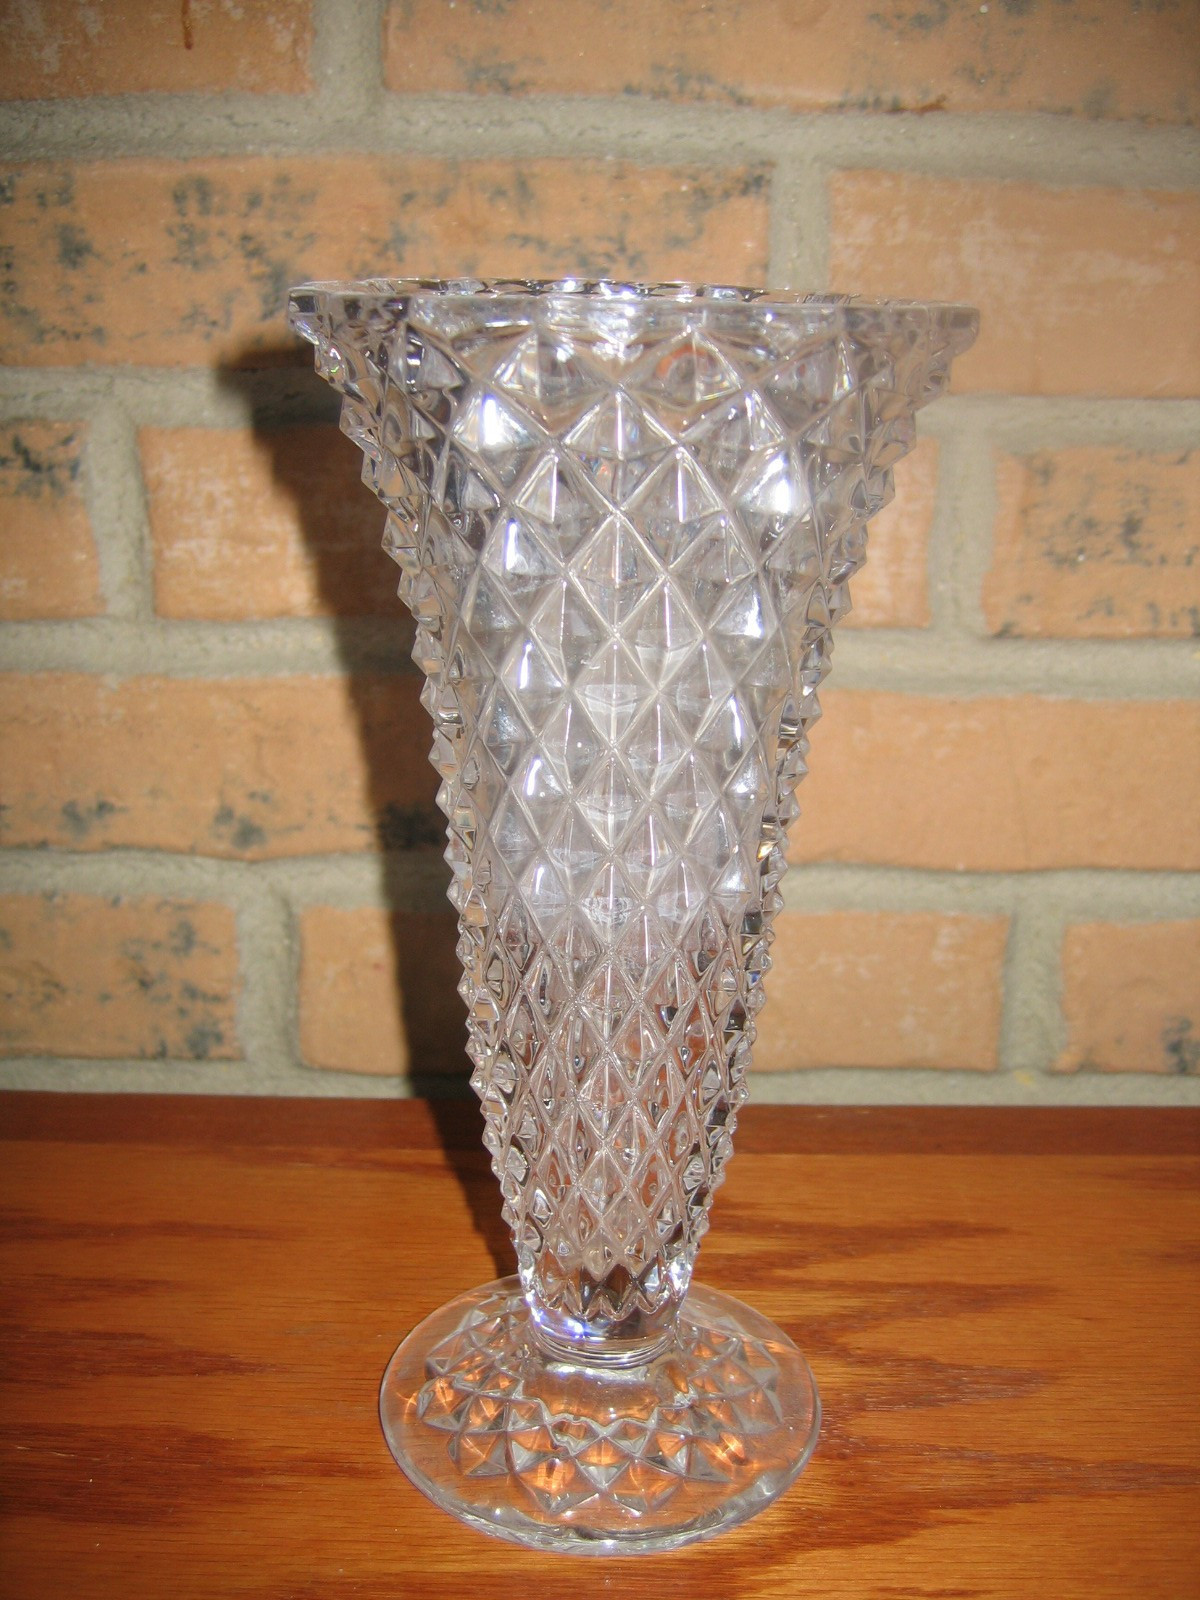 28 Spectacular Lead Crystal Cut Glass Vase 2024 free download lead crystal cut glass vase of lead crystal vases pics glass vase decoration ideas will clipart within lead crystal vases pics glass vase decoration ideas will clipart colored flower vase cl